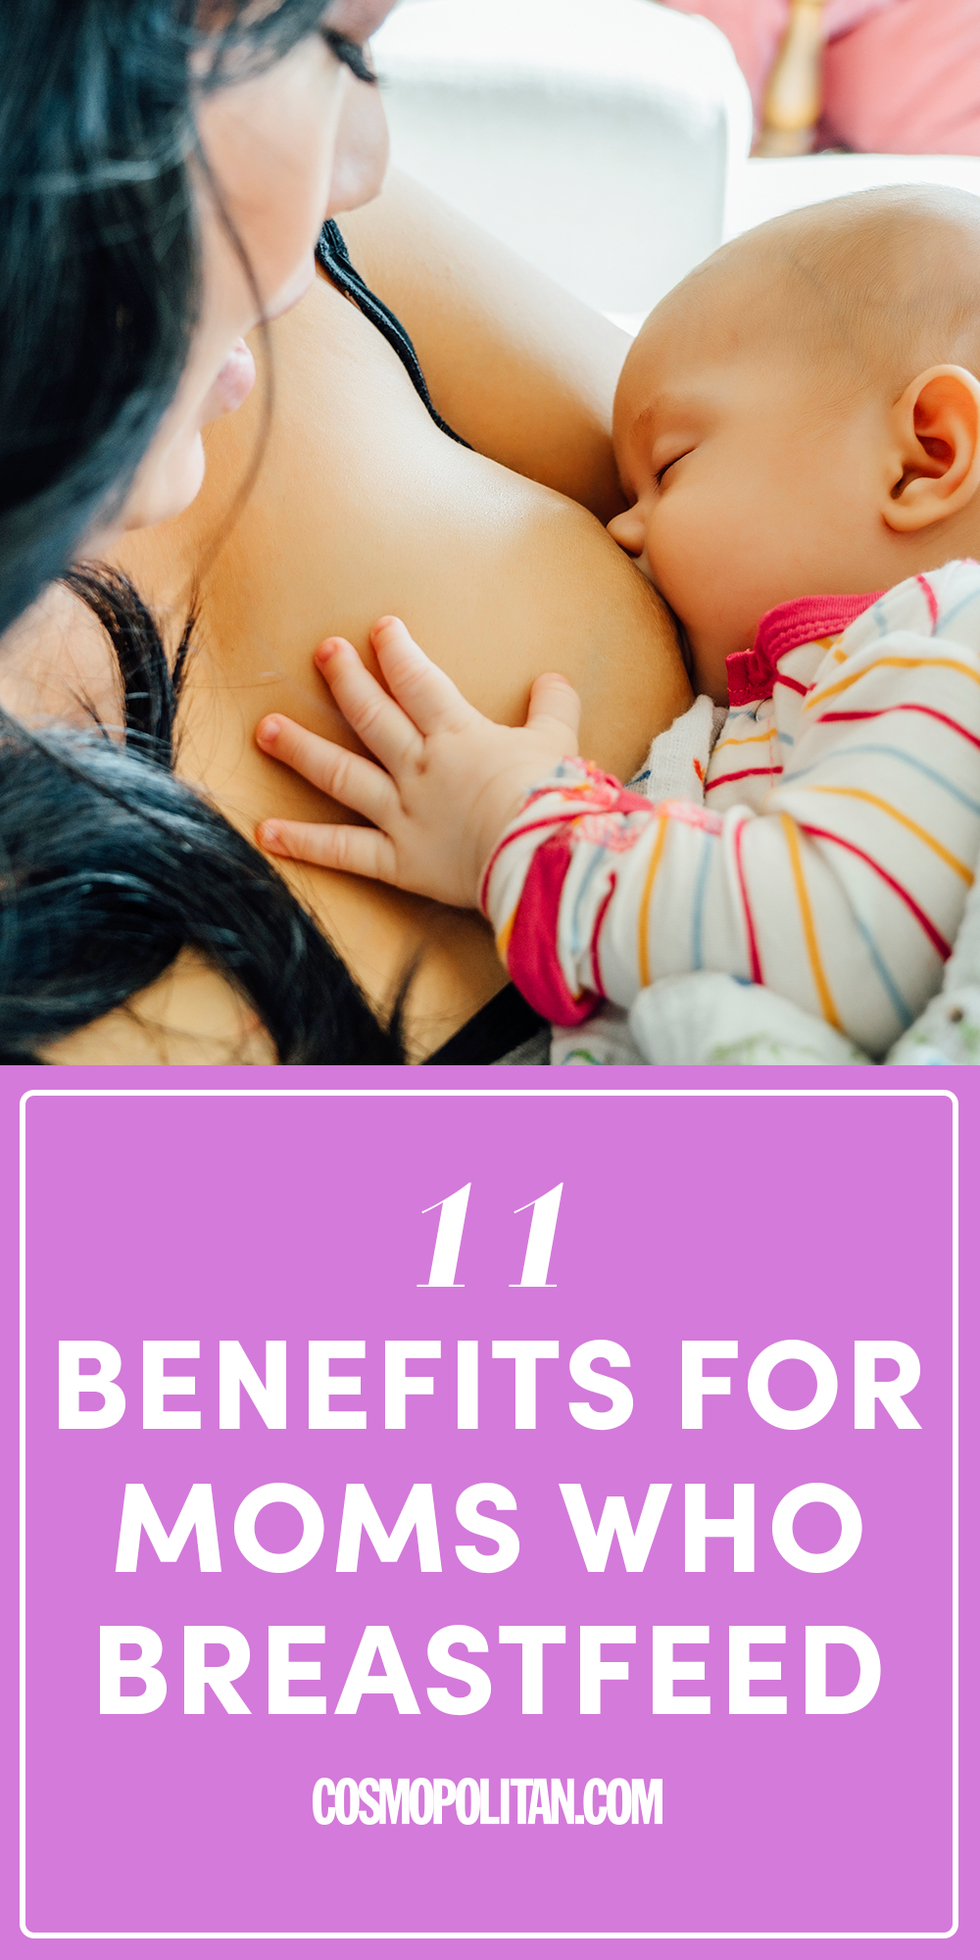 Soon Siliping Mom Milk Xxx - 11 Benefits of Breastfeeding for Moms - 10 Facts About Breastfeeding